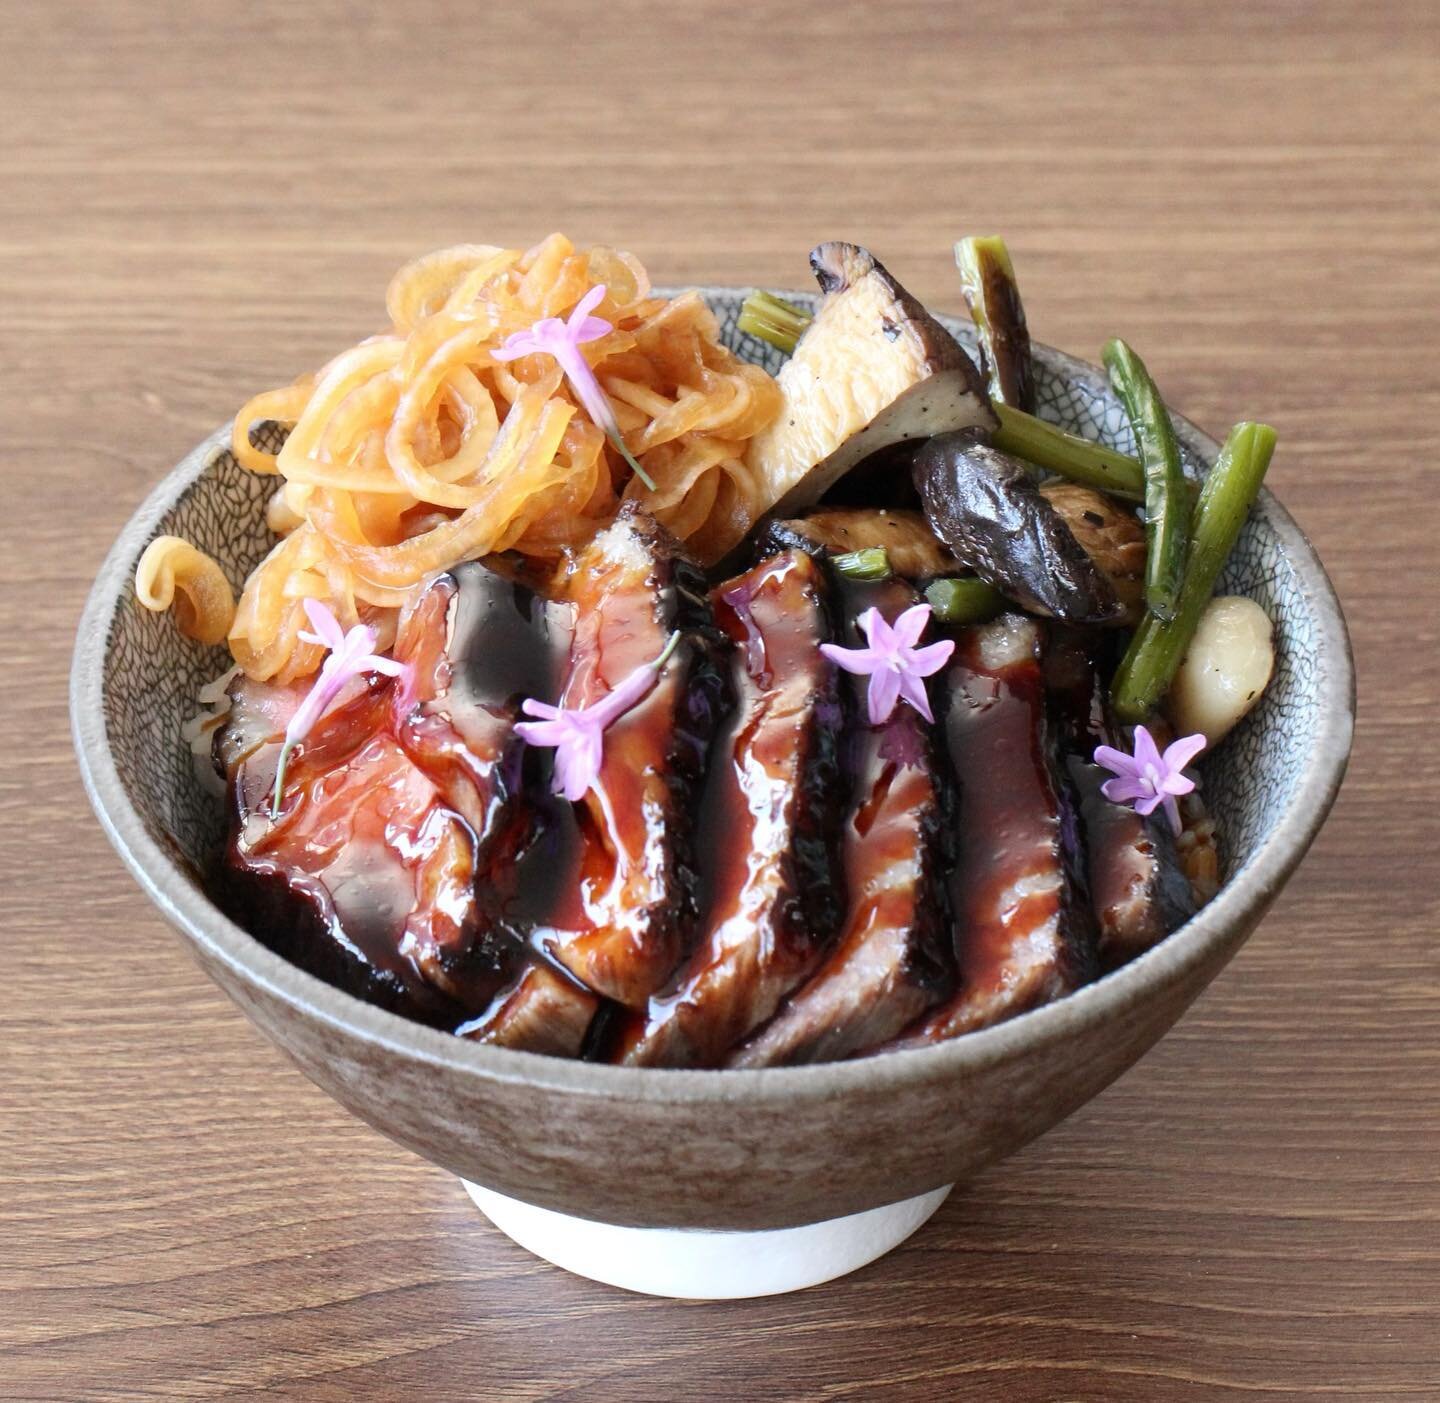 New trading hours 🙌Wednesday to Sunday 11:30am - 2:30pm, 5pm - 9pm (last orders at 8:30pm) Walk-Ins Only ❤️ 

Photo: 12hr Smoked Karubi Don

#uncledon #uncledonburi #uncledonrosalie #newtradinghours #smokedkarubi #donburi #paddingtonbrisbane #brisba